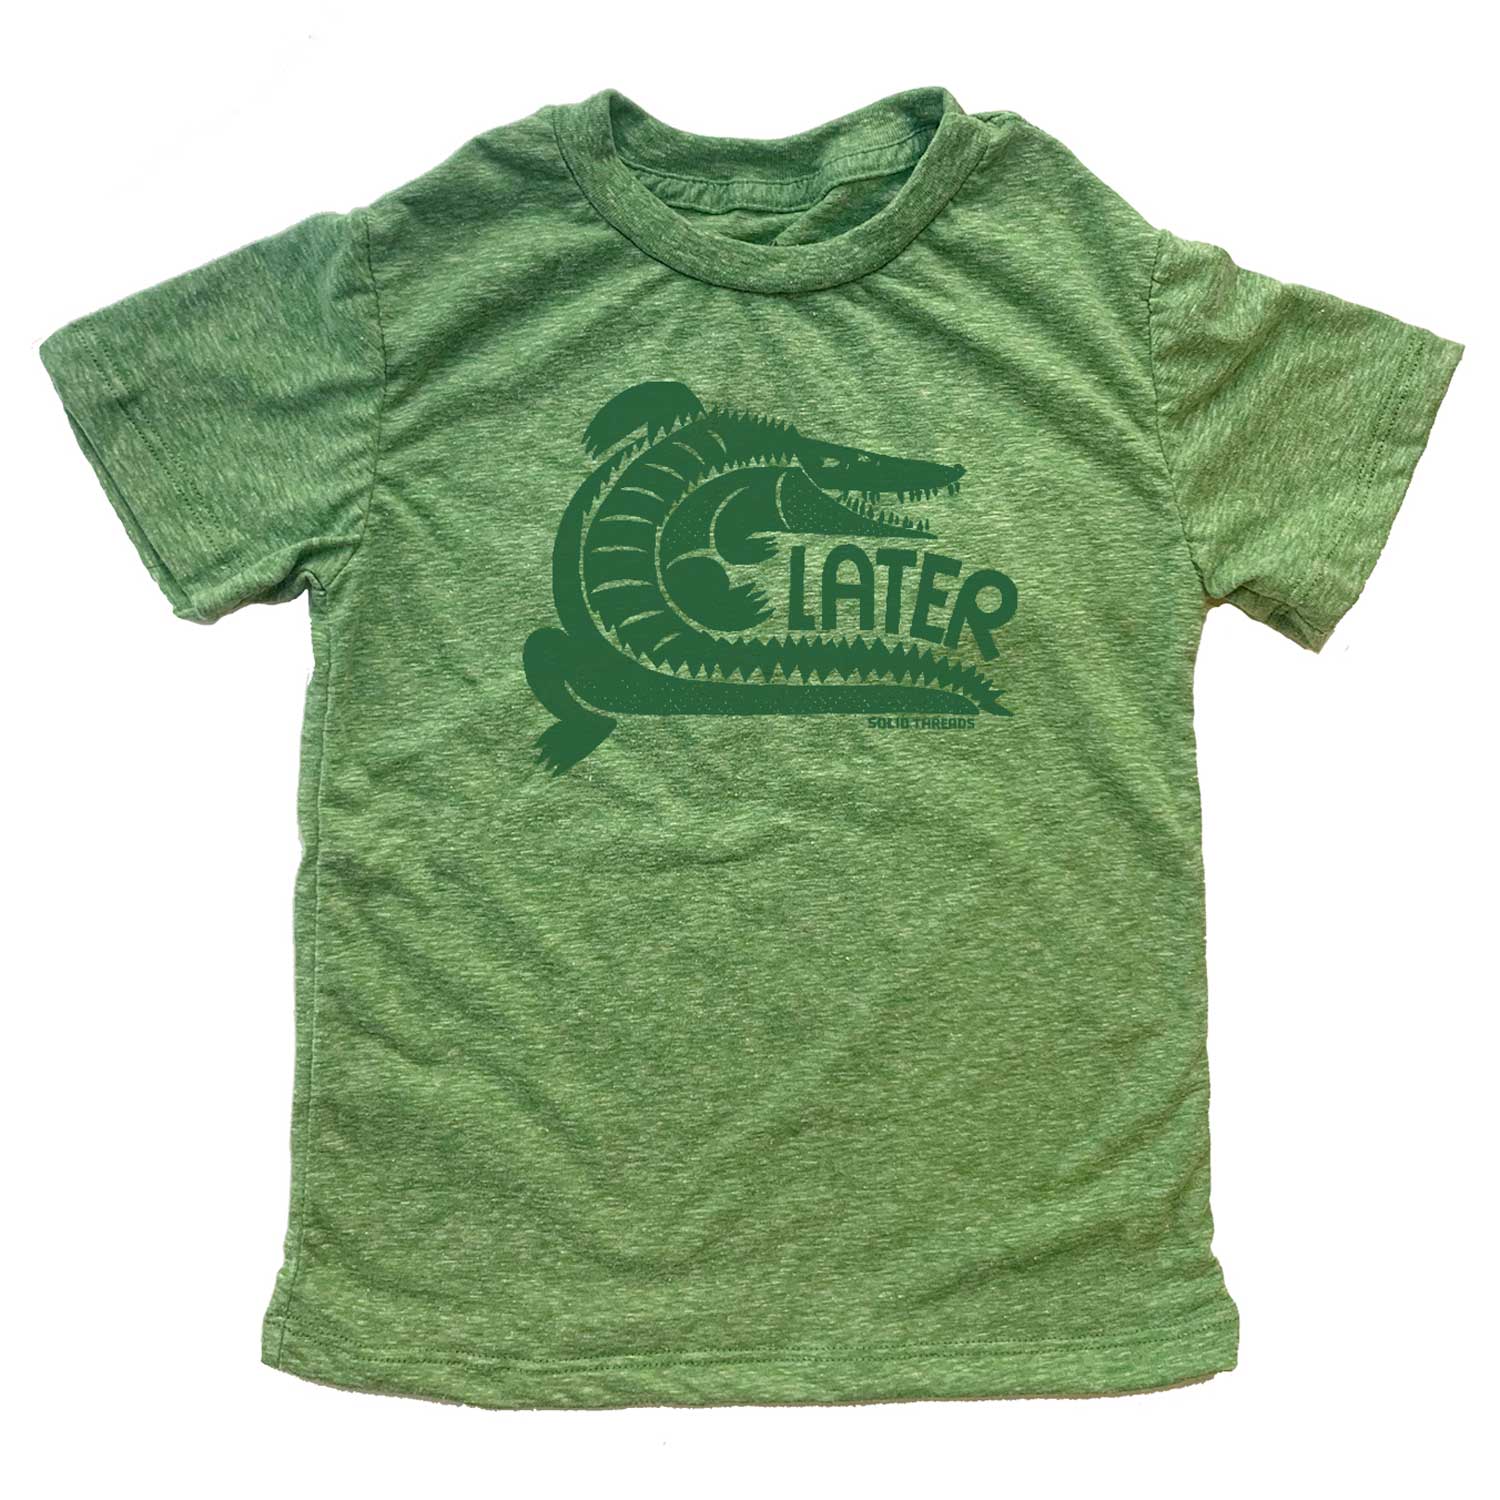 Kid's Later Gator Retro After Awhile Crocodile Graphic Tee | Funny Alligator T-Shirt | Solid Threads